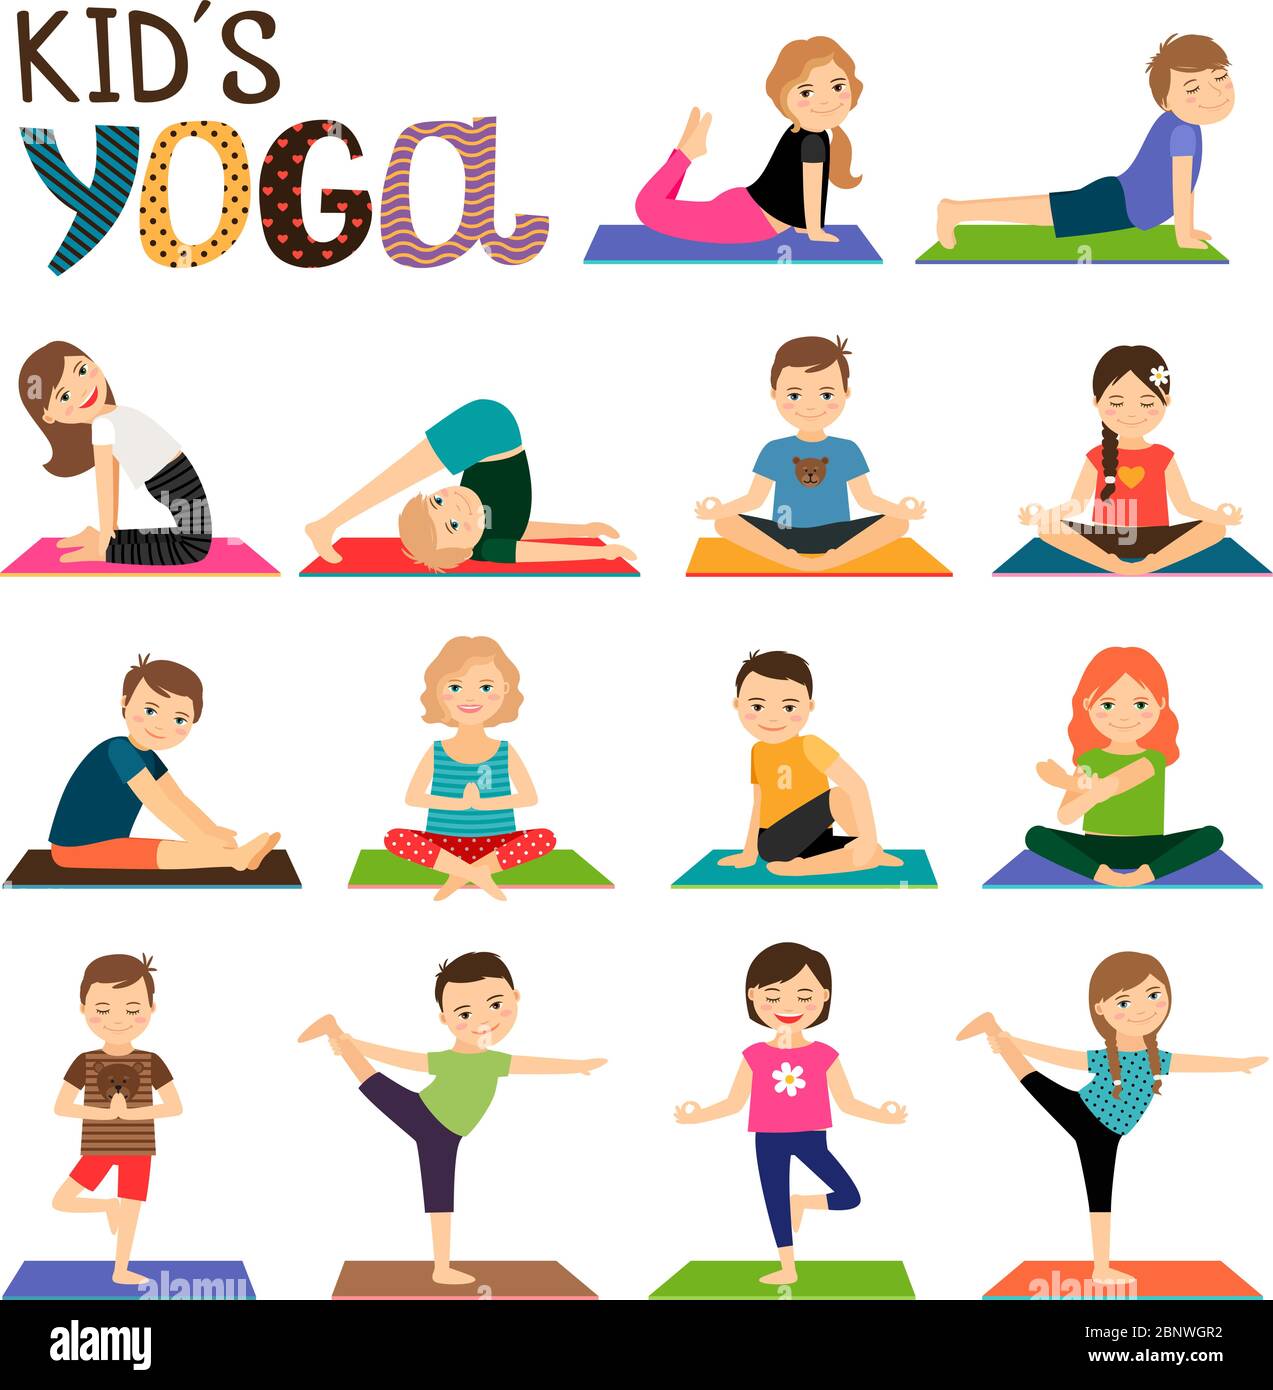 Kids yoga vector icons set. Smiling children in different yoga poses ...